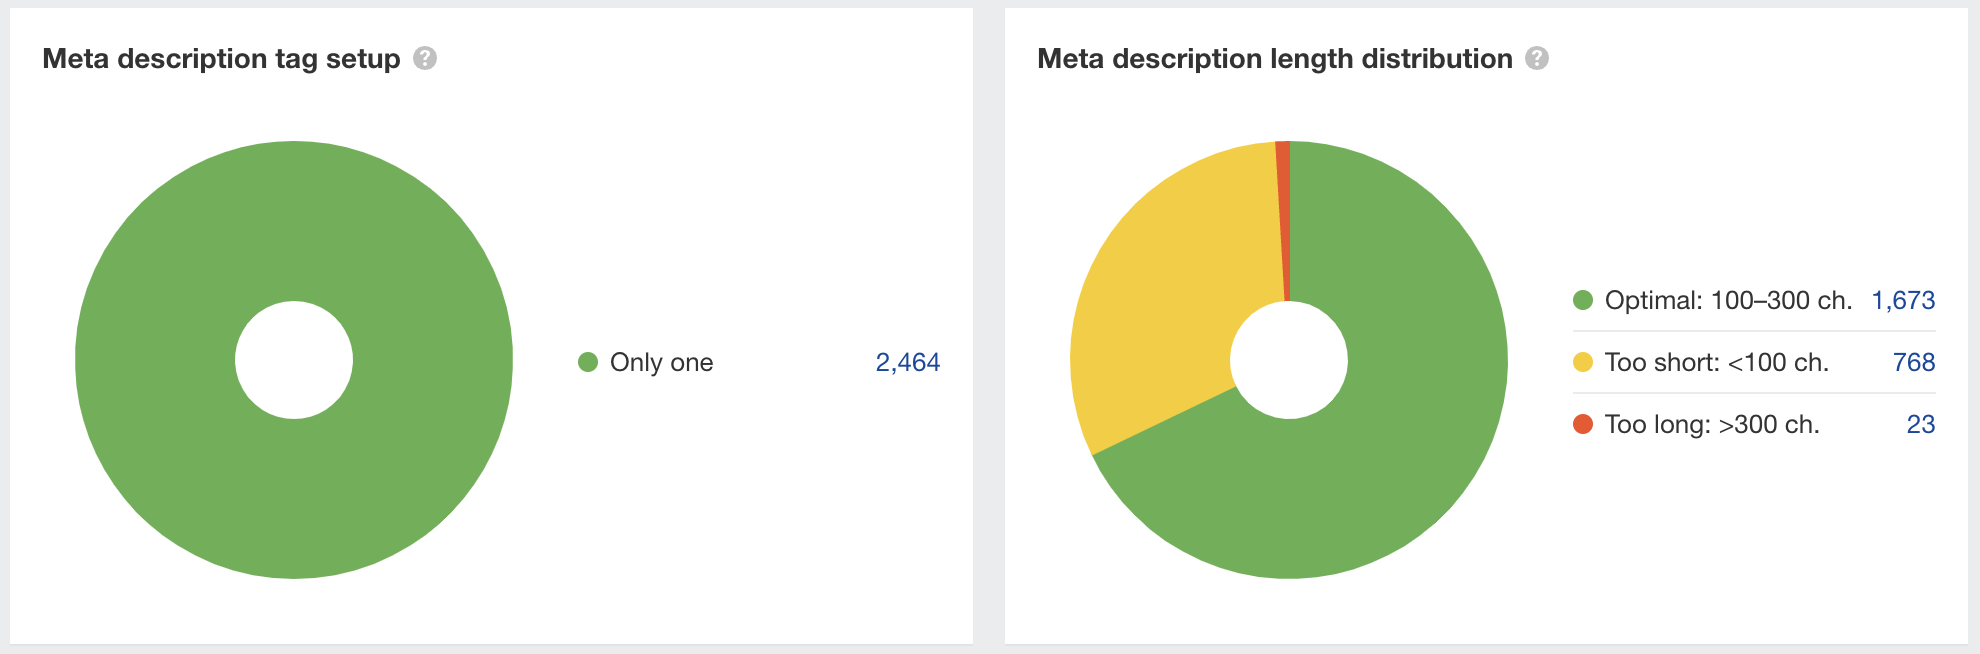 Checking for meta description issues in Ahrefs' Site Audit